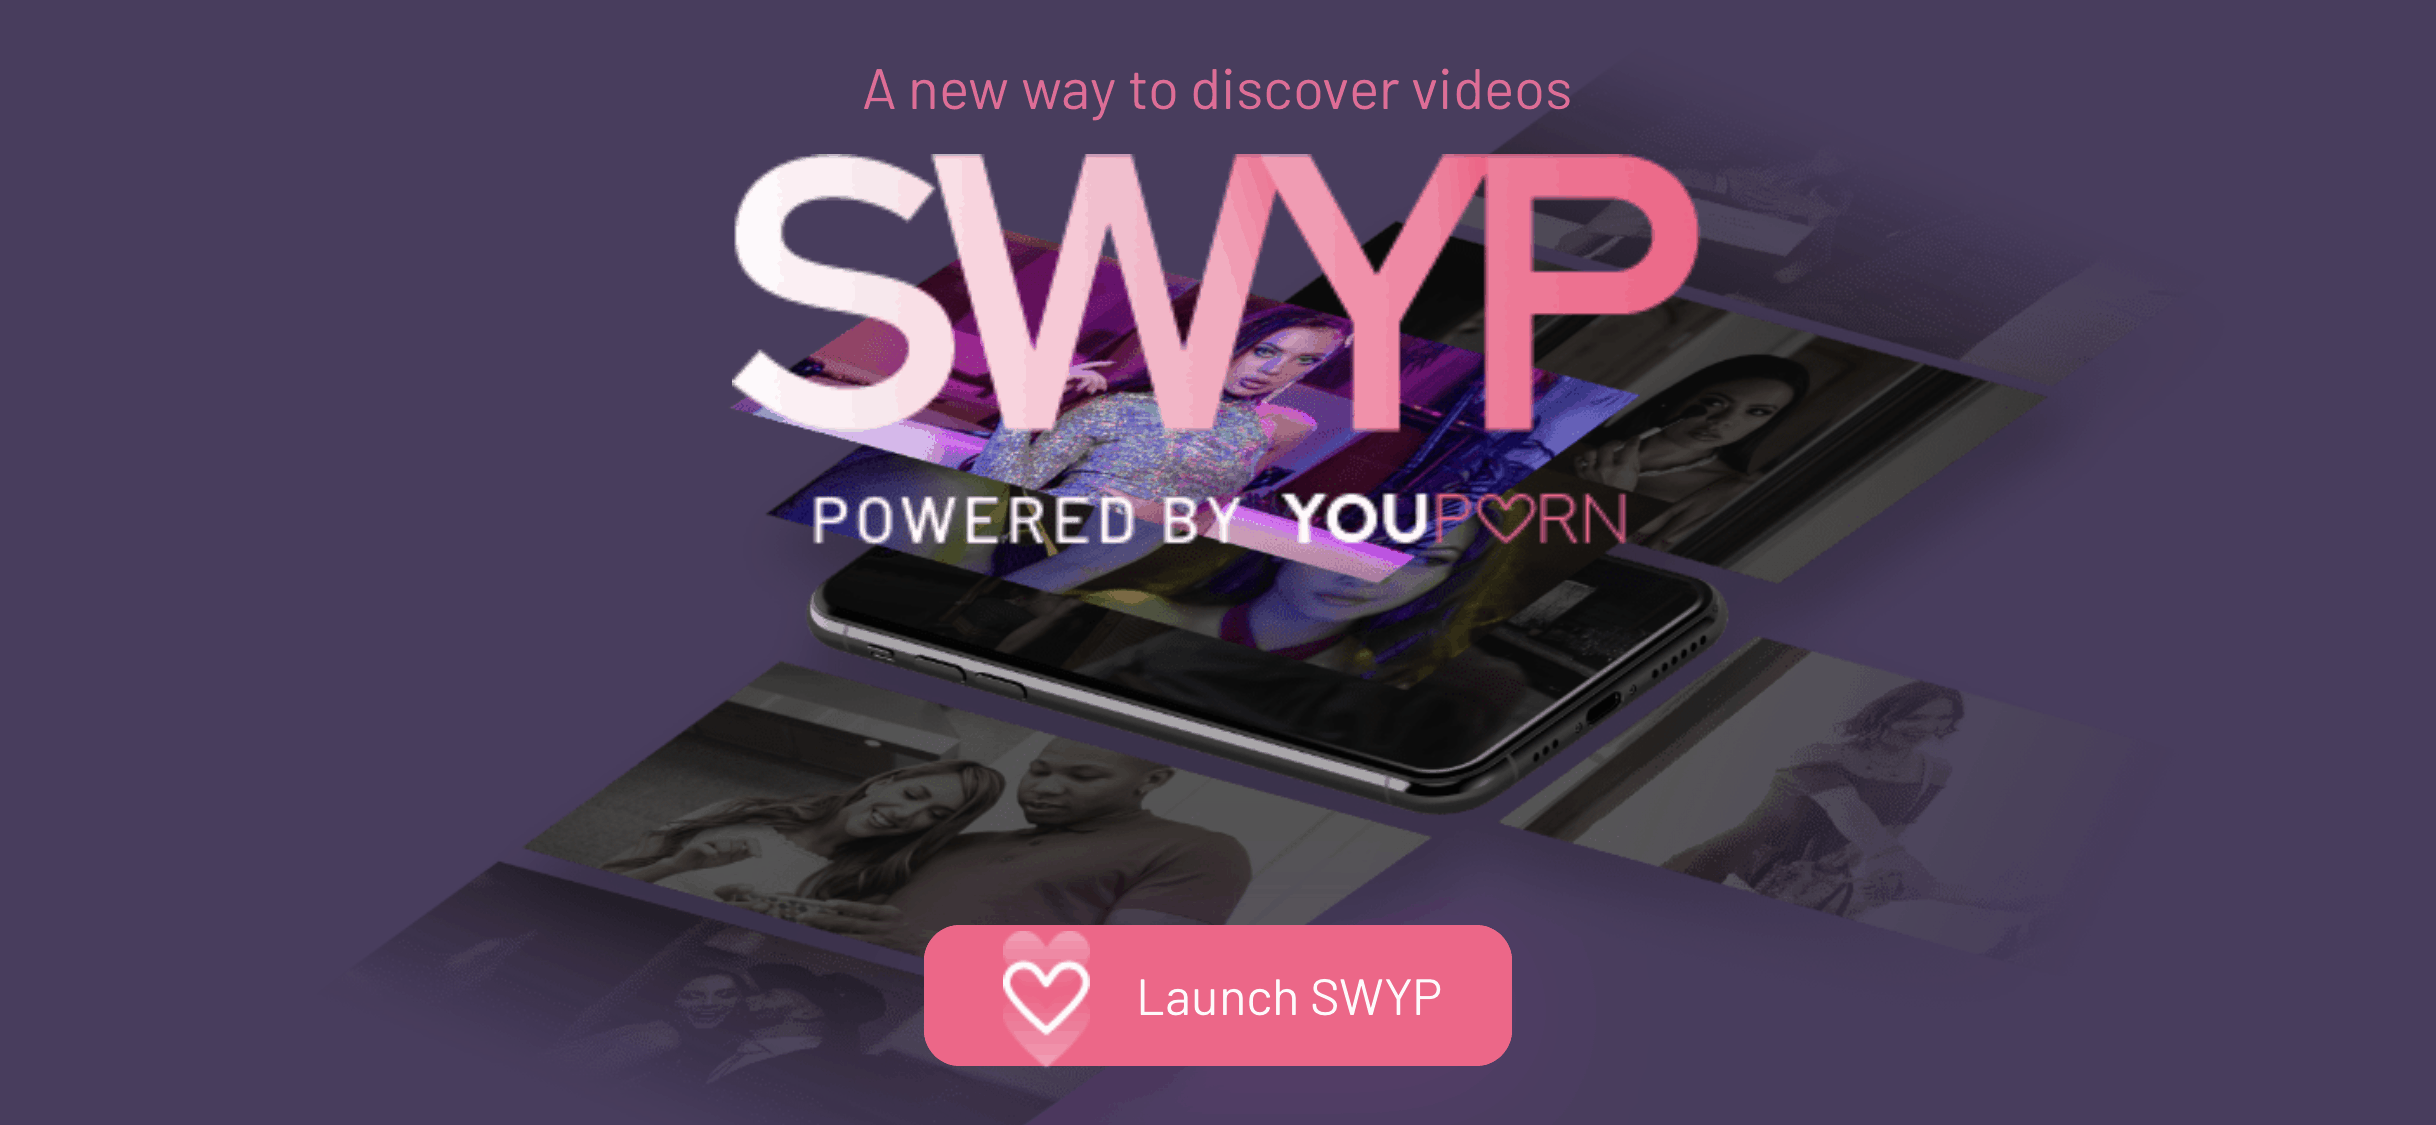 Http Www Youporn Com Swyp Welcome